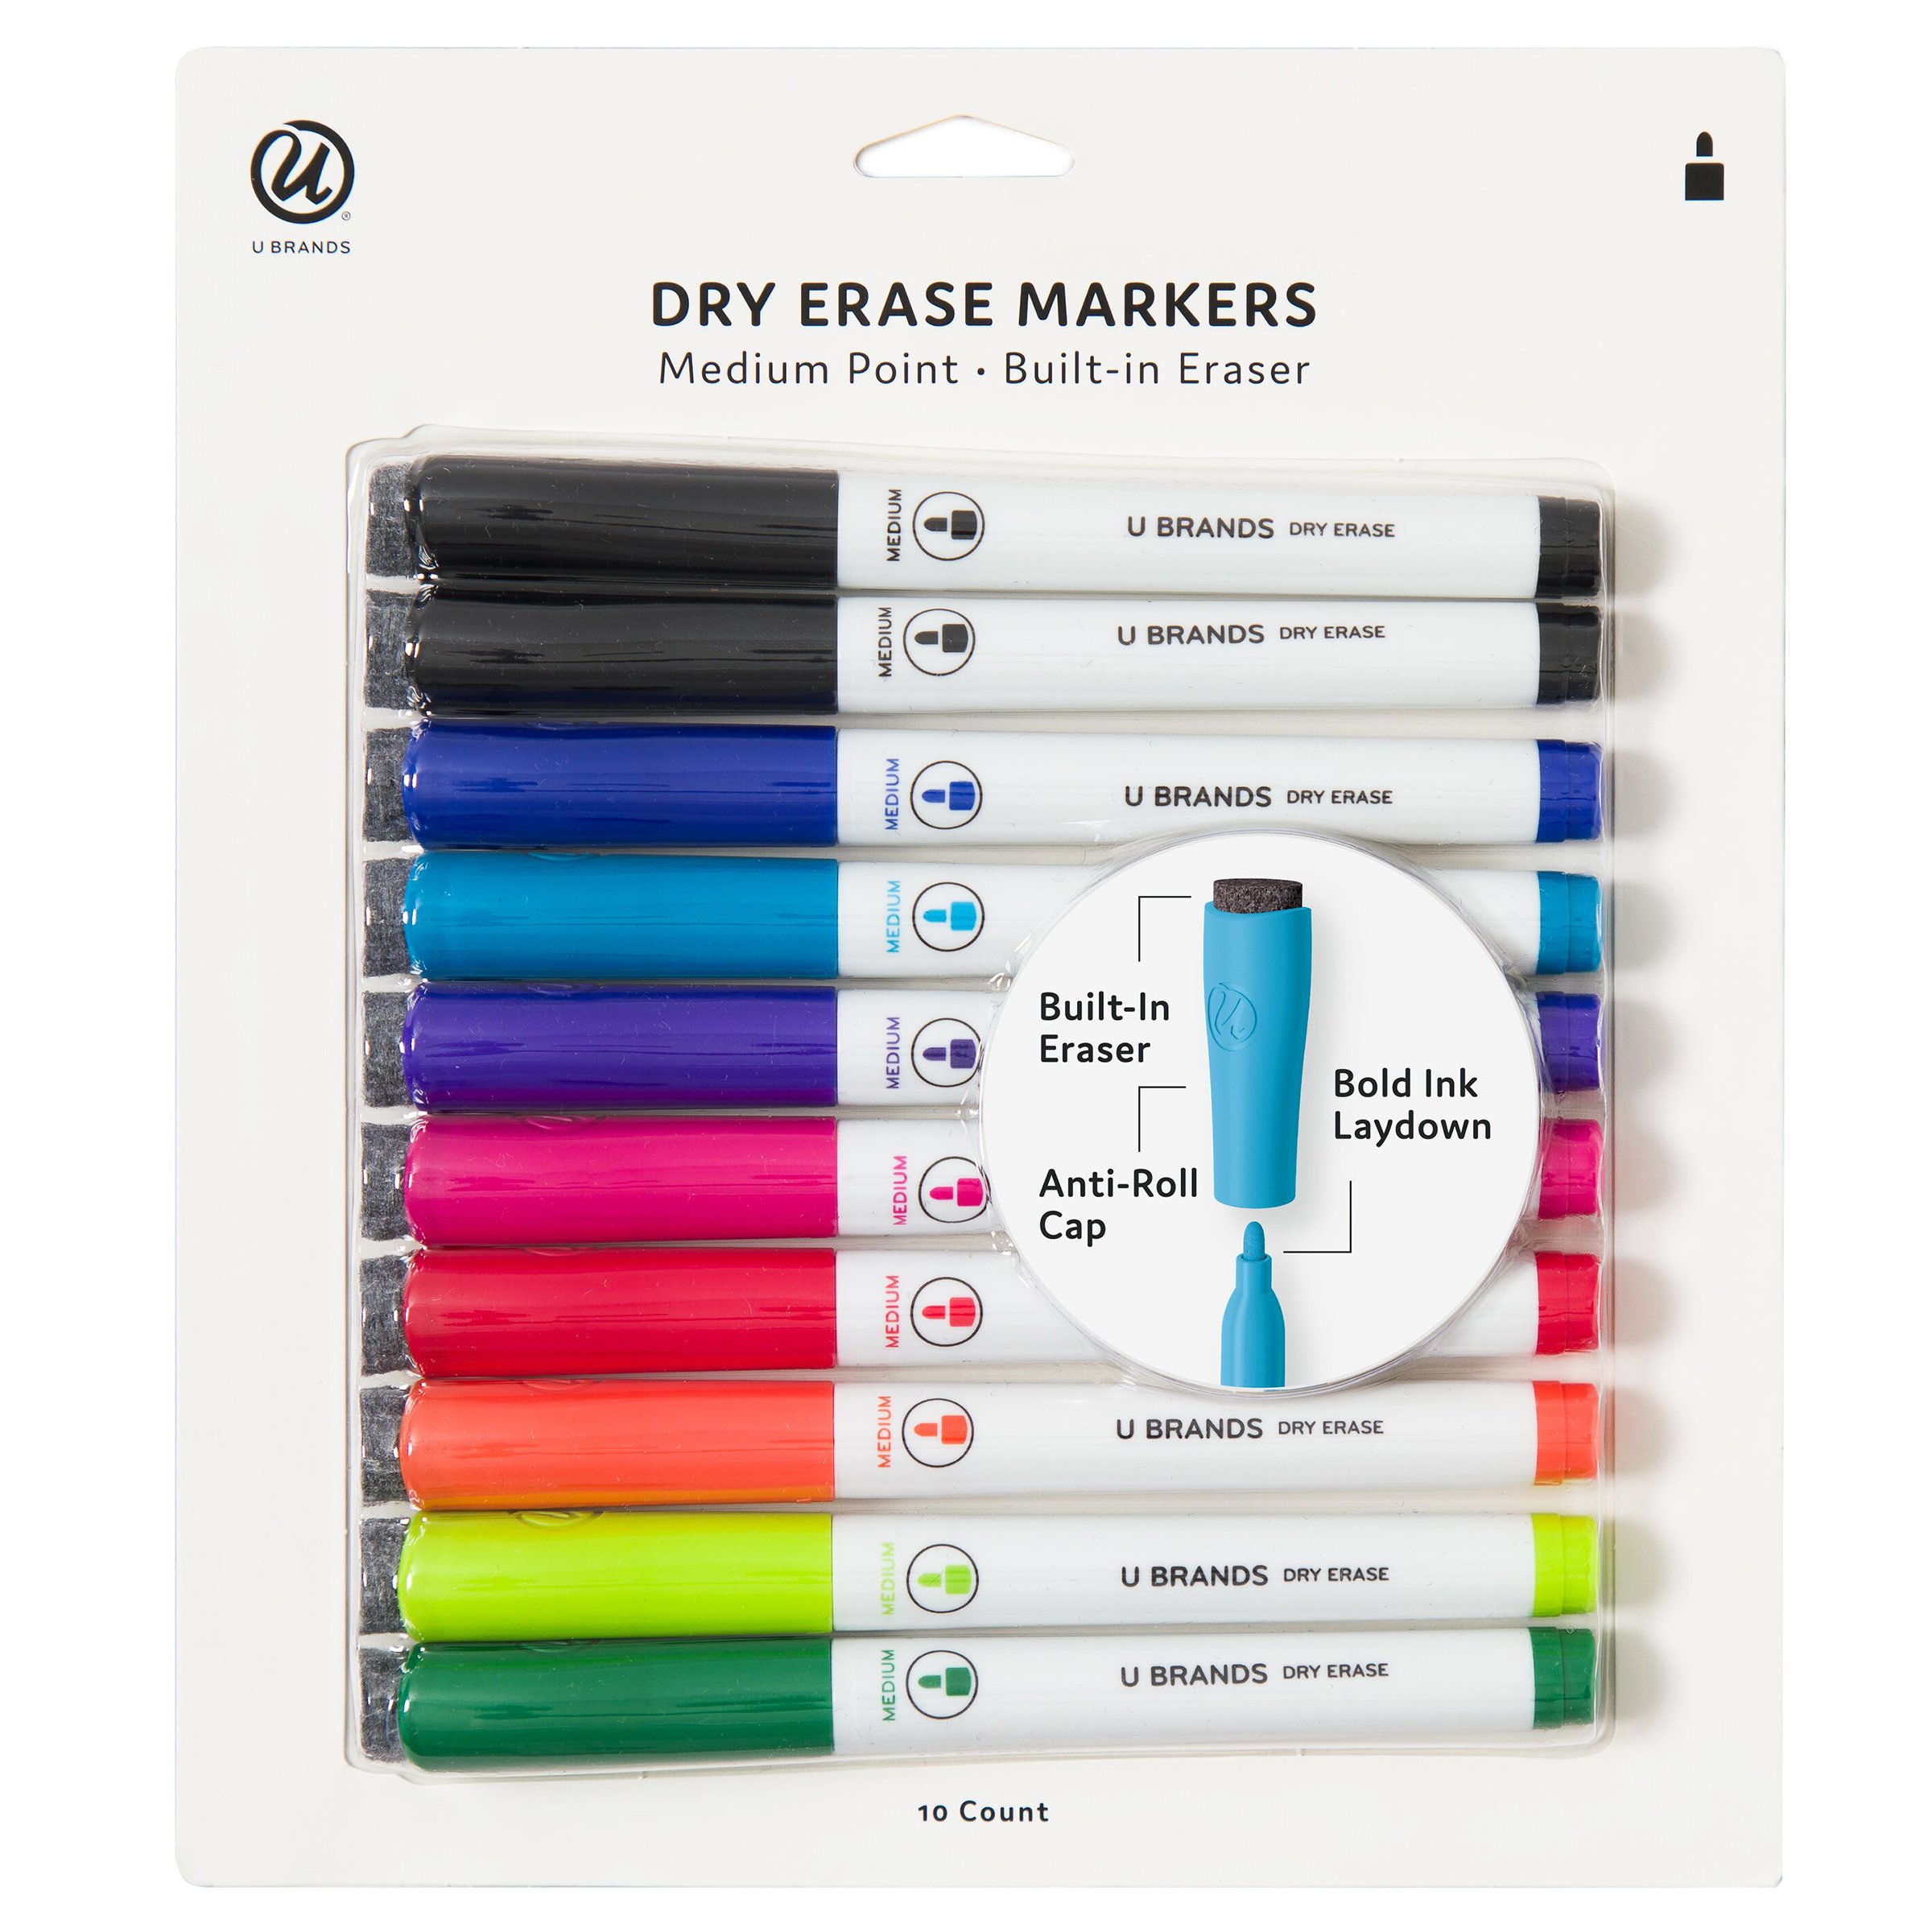 Details about   THE ULTIMATE Dry Erase White Board With 5 Magnetic Dry Erase Markers & Eraser! 